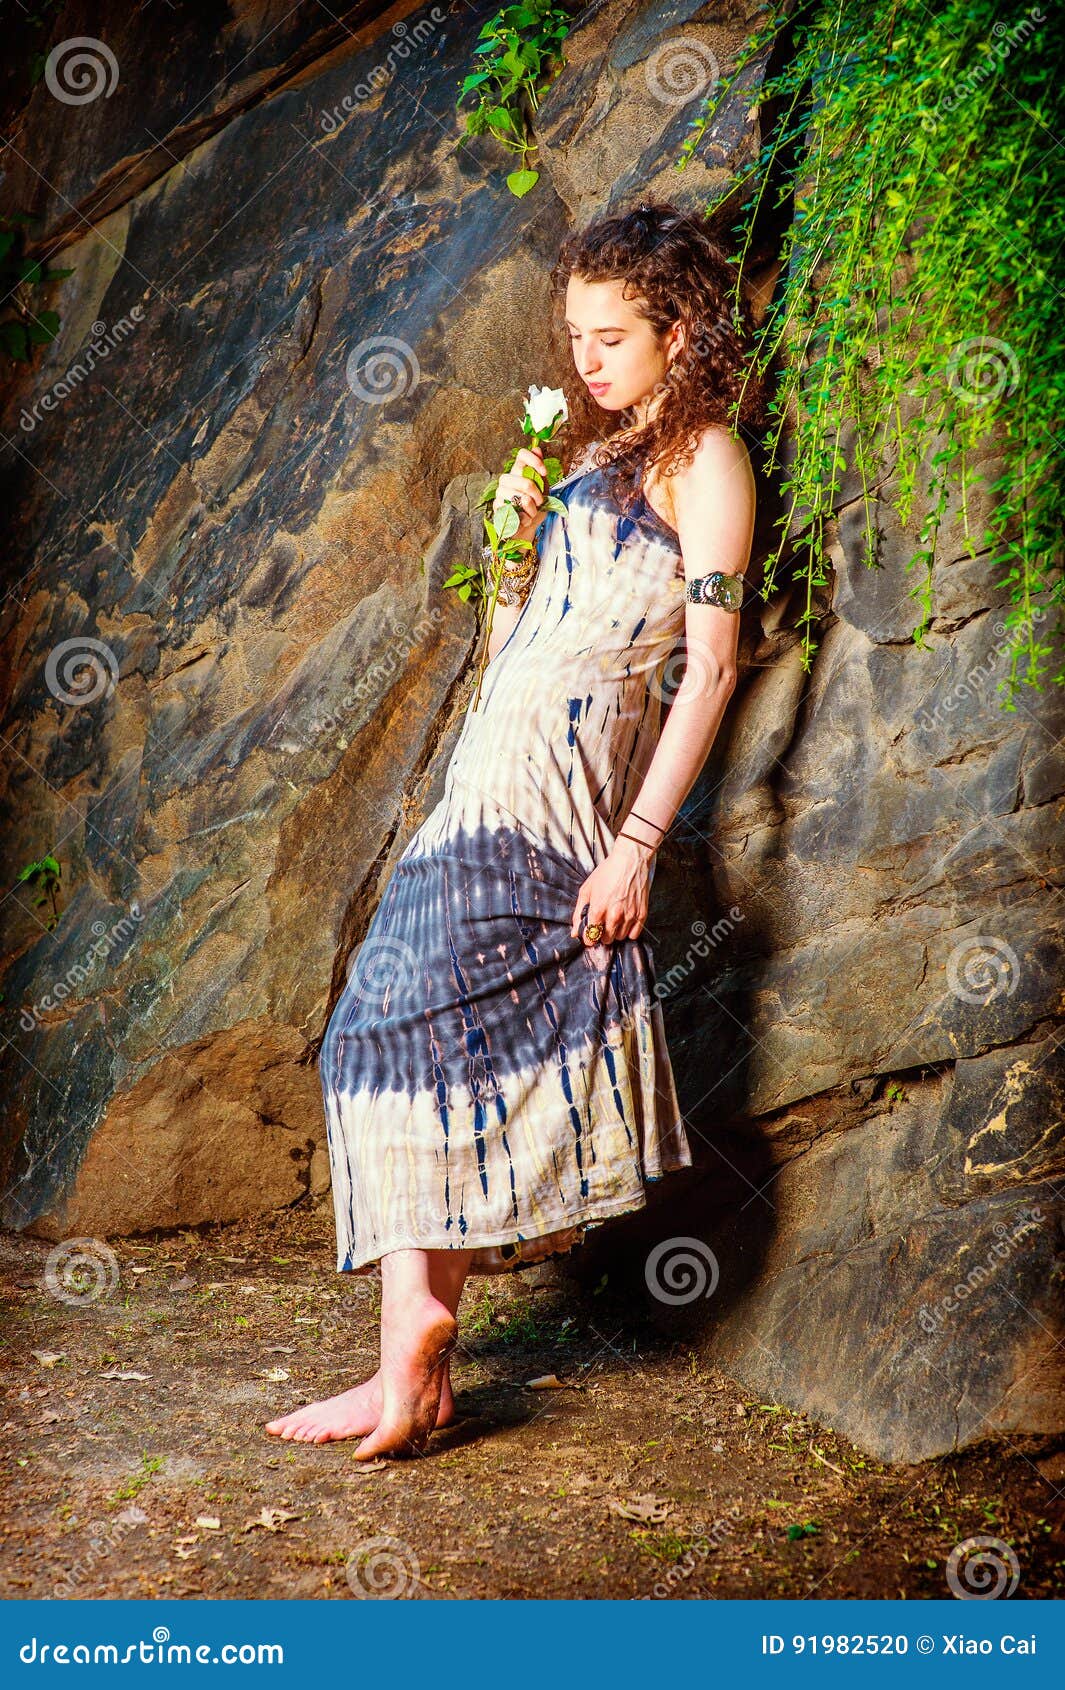 https://thumbs.dreamstime.com/z/young-american-woman-missing-you-white-rose-new-york-girl-dressing-patterned-long-dress-bracelet-barefoot-beautiful-91982520.jpg